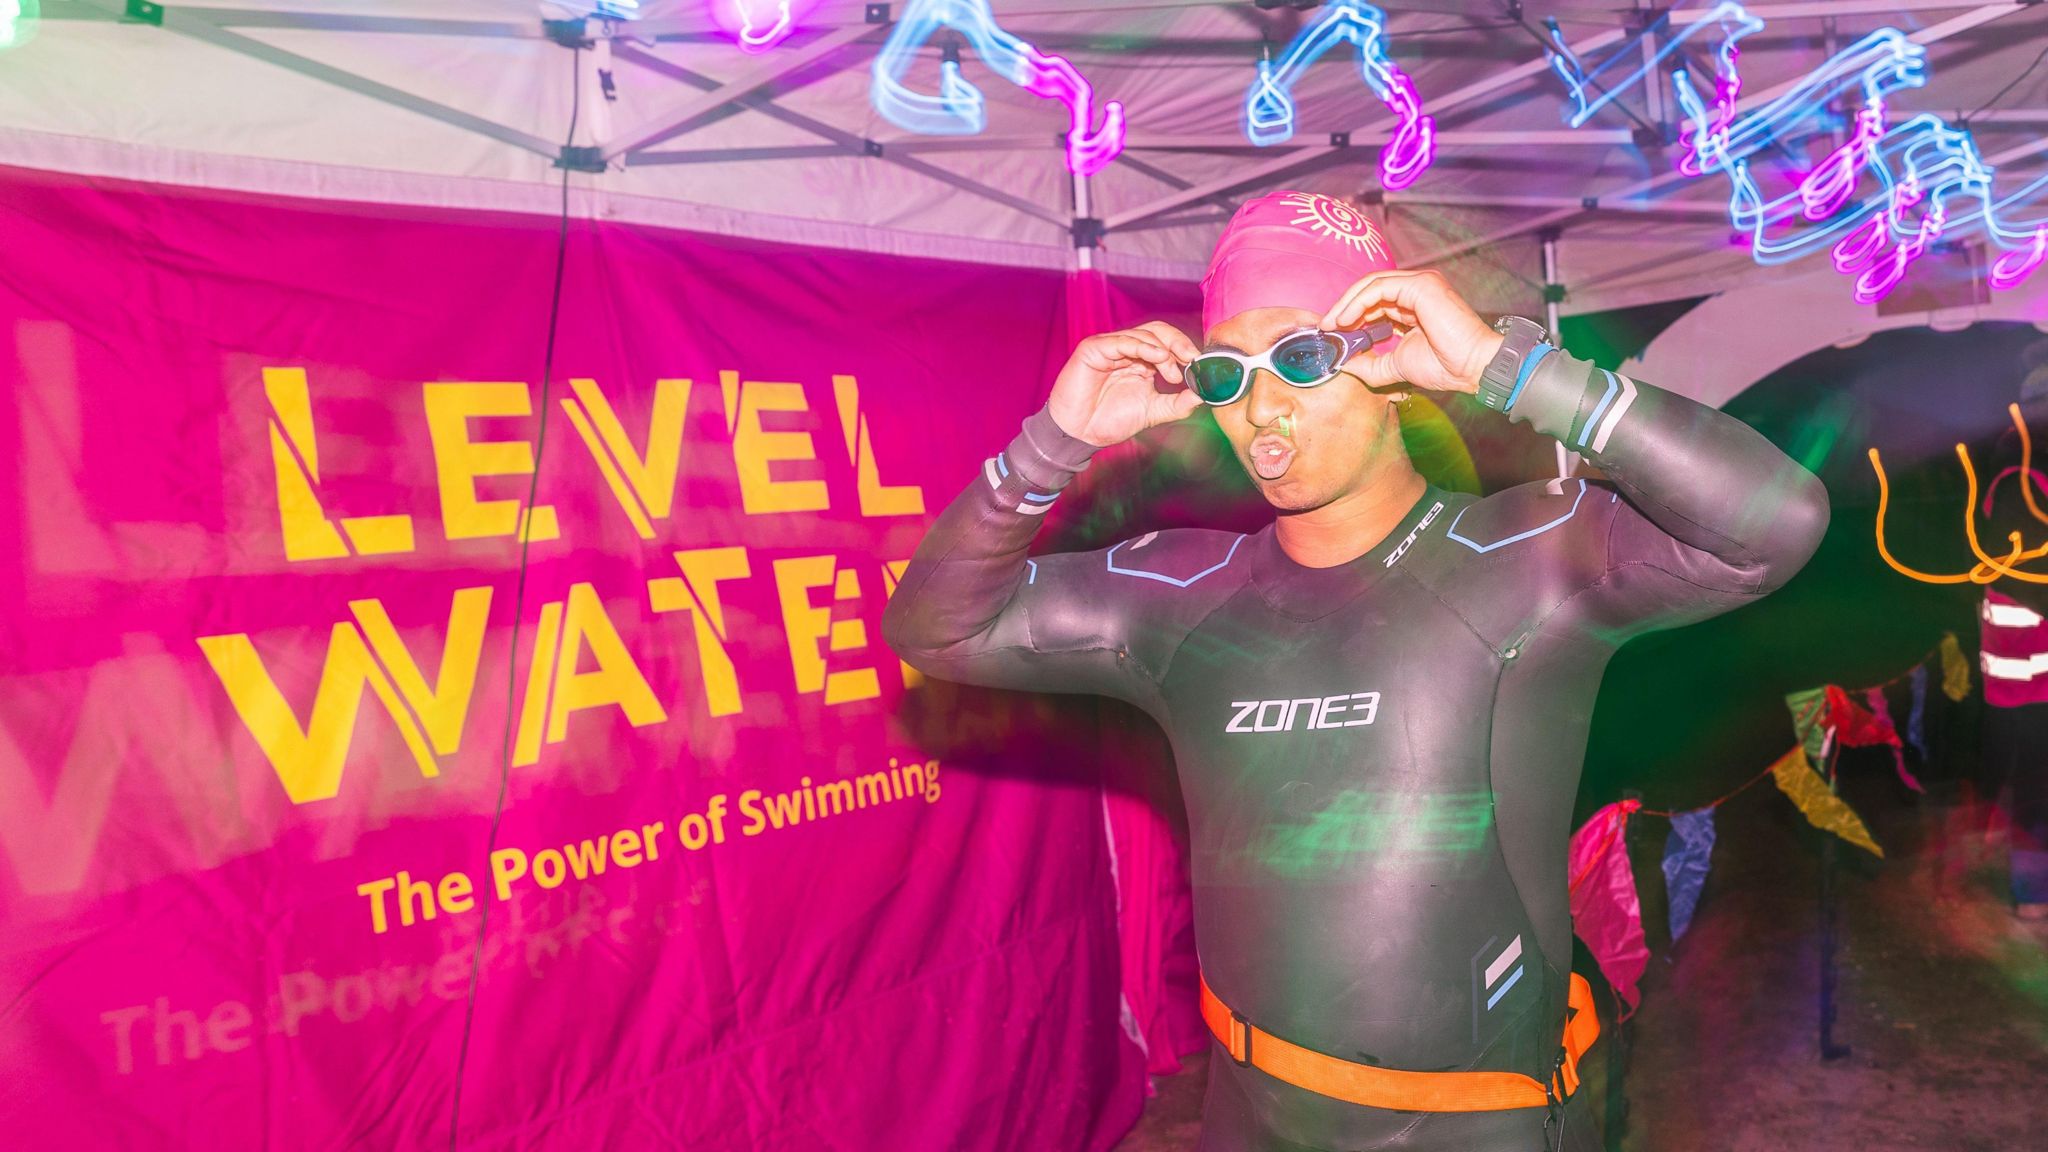 A swimmer puts their goggles on in front of a level water sign